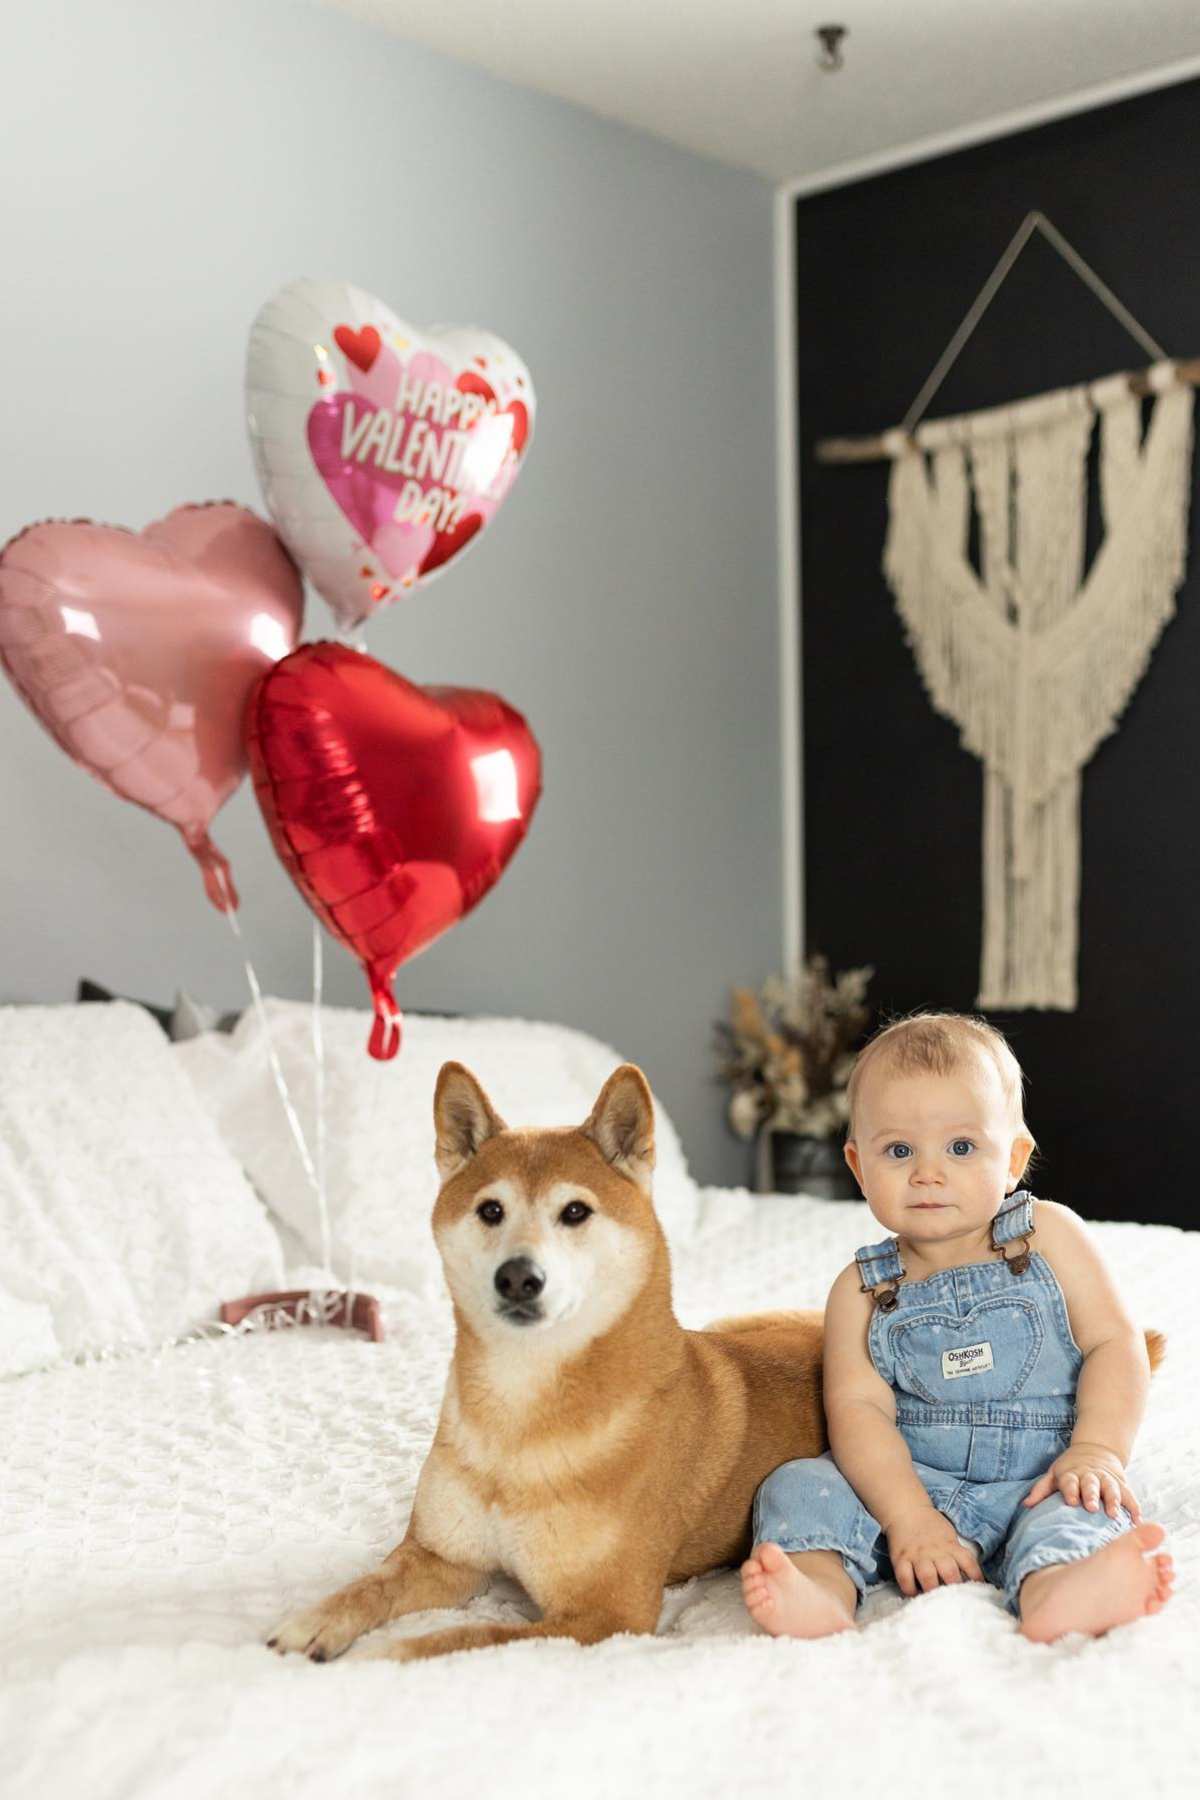 A baby sits on a bed next to a dog and balloons.